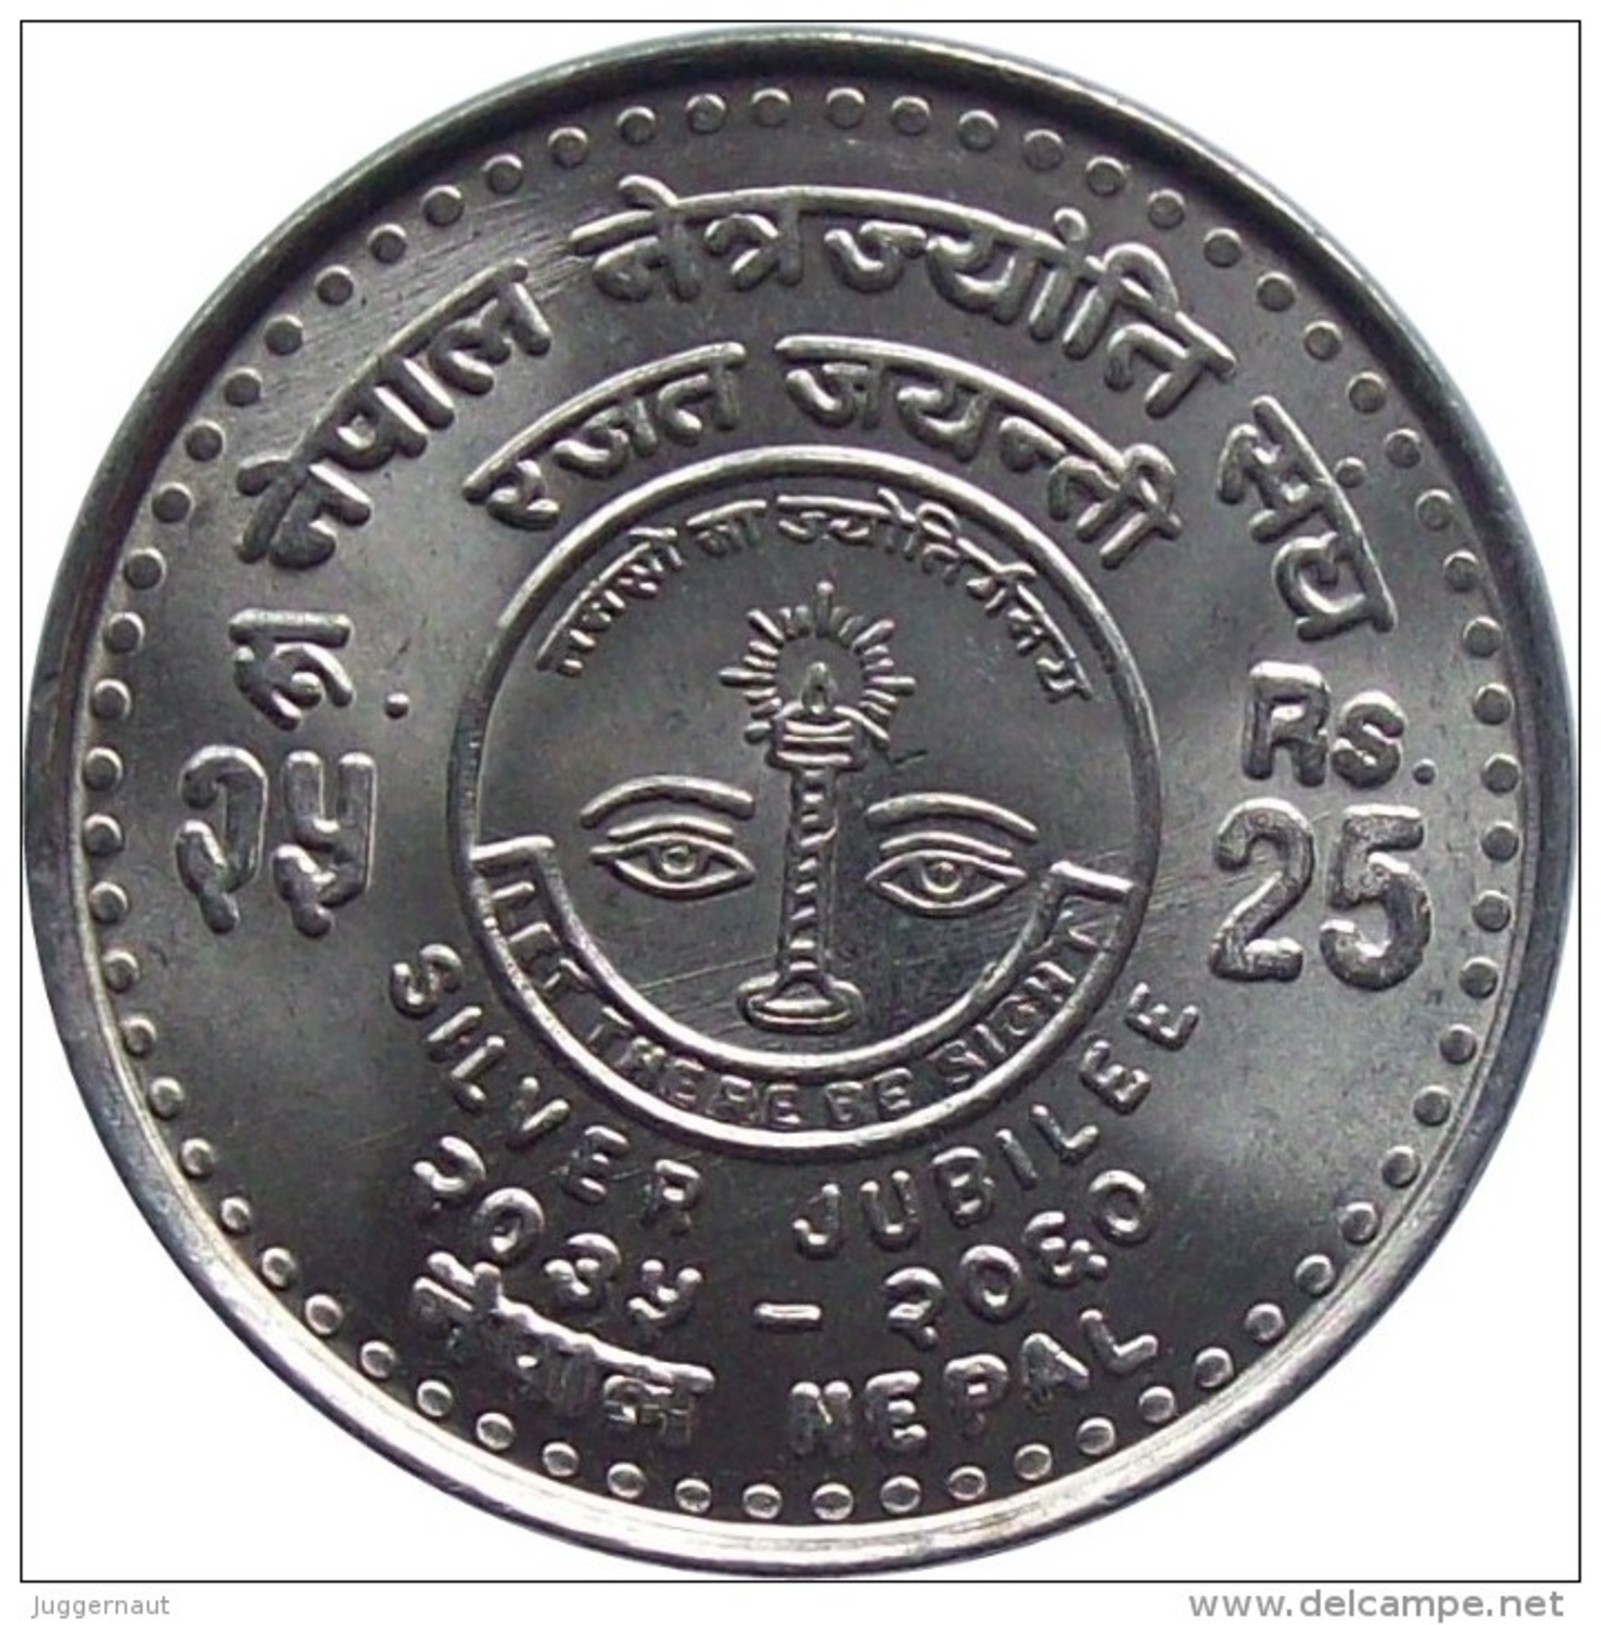 NEPAL EYE CARE SOCIETY SILVER JUBILEE COMMEMORATIVE COIN NEPAL 2003 KM-1164 UNCIRCULATED UNC - Népal